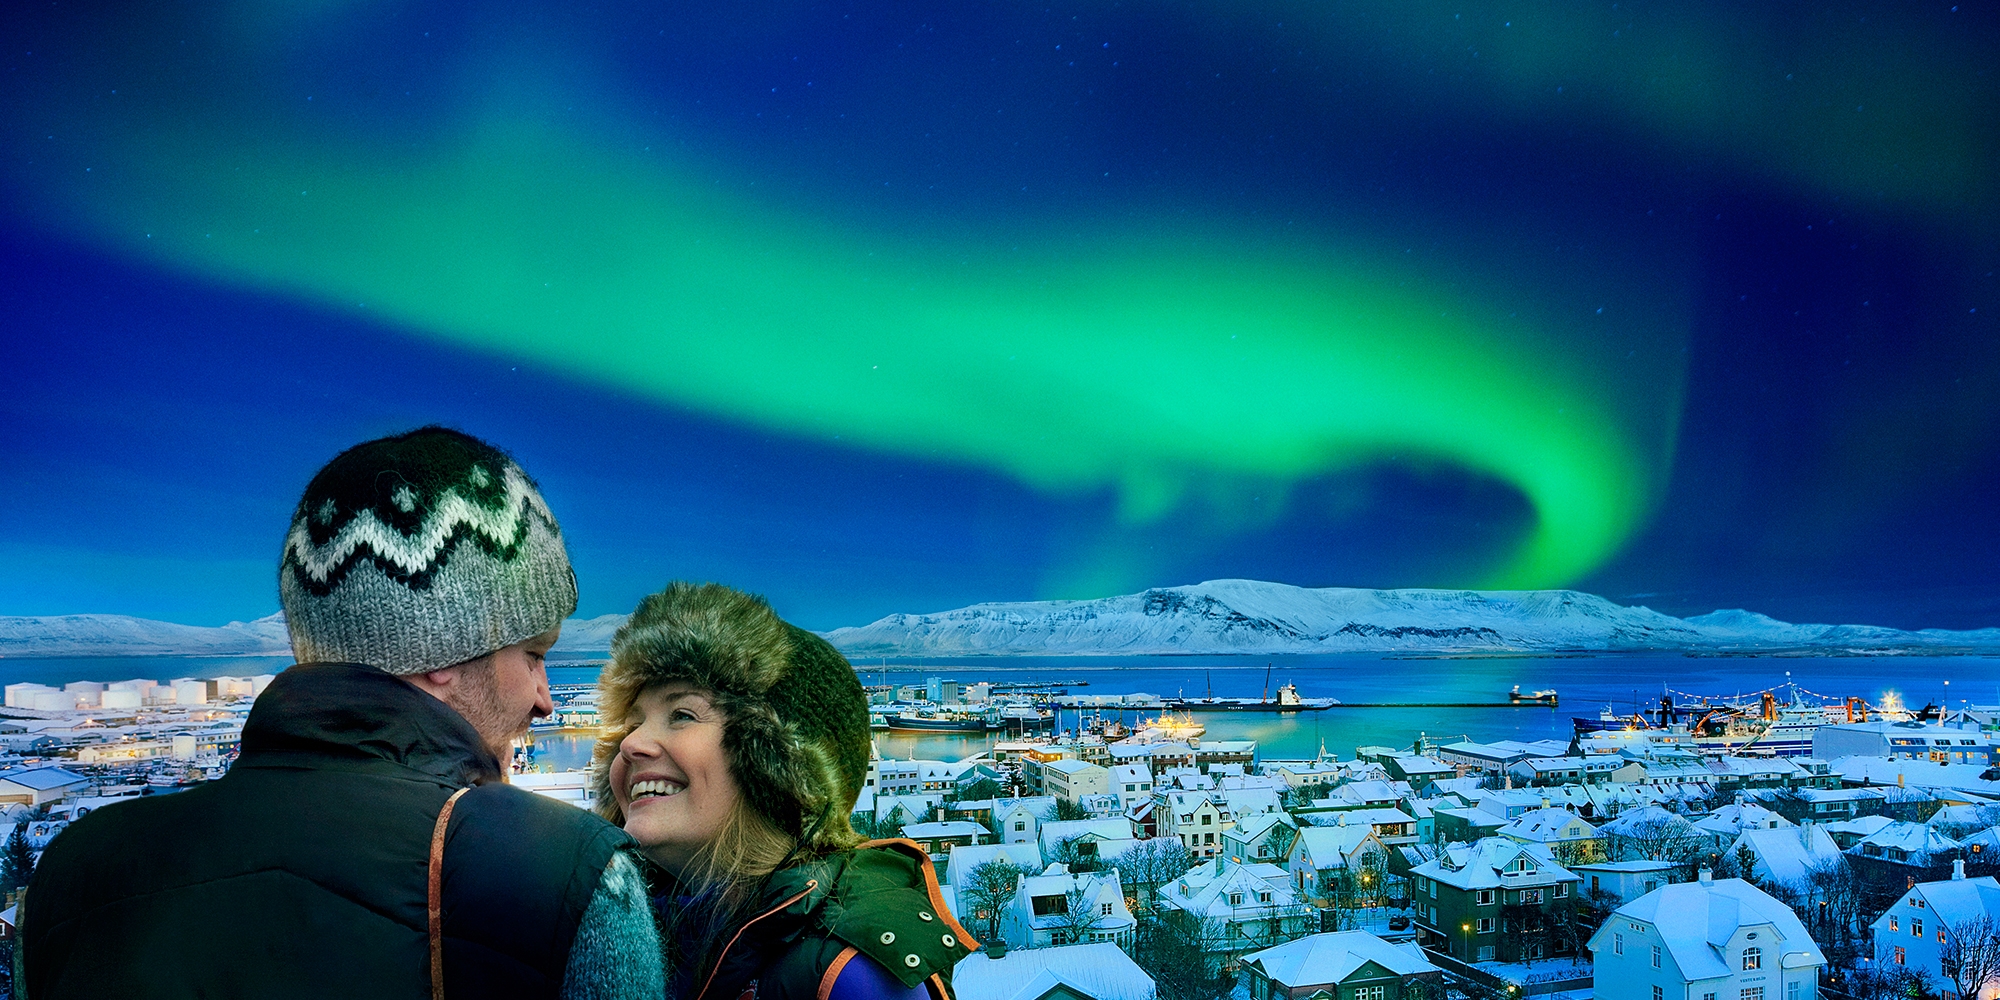 A couple enjoys a romantic break in Iceland with the northern lights dancing in the background